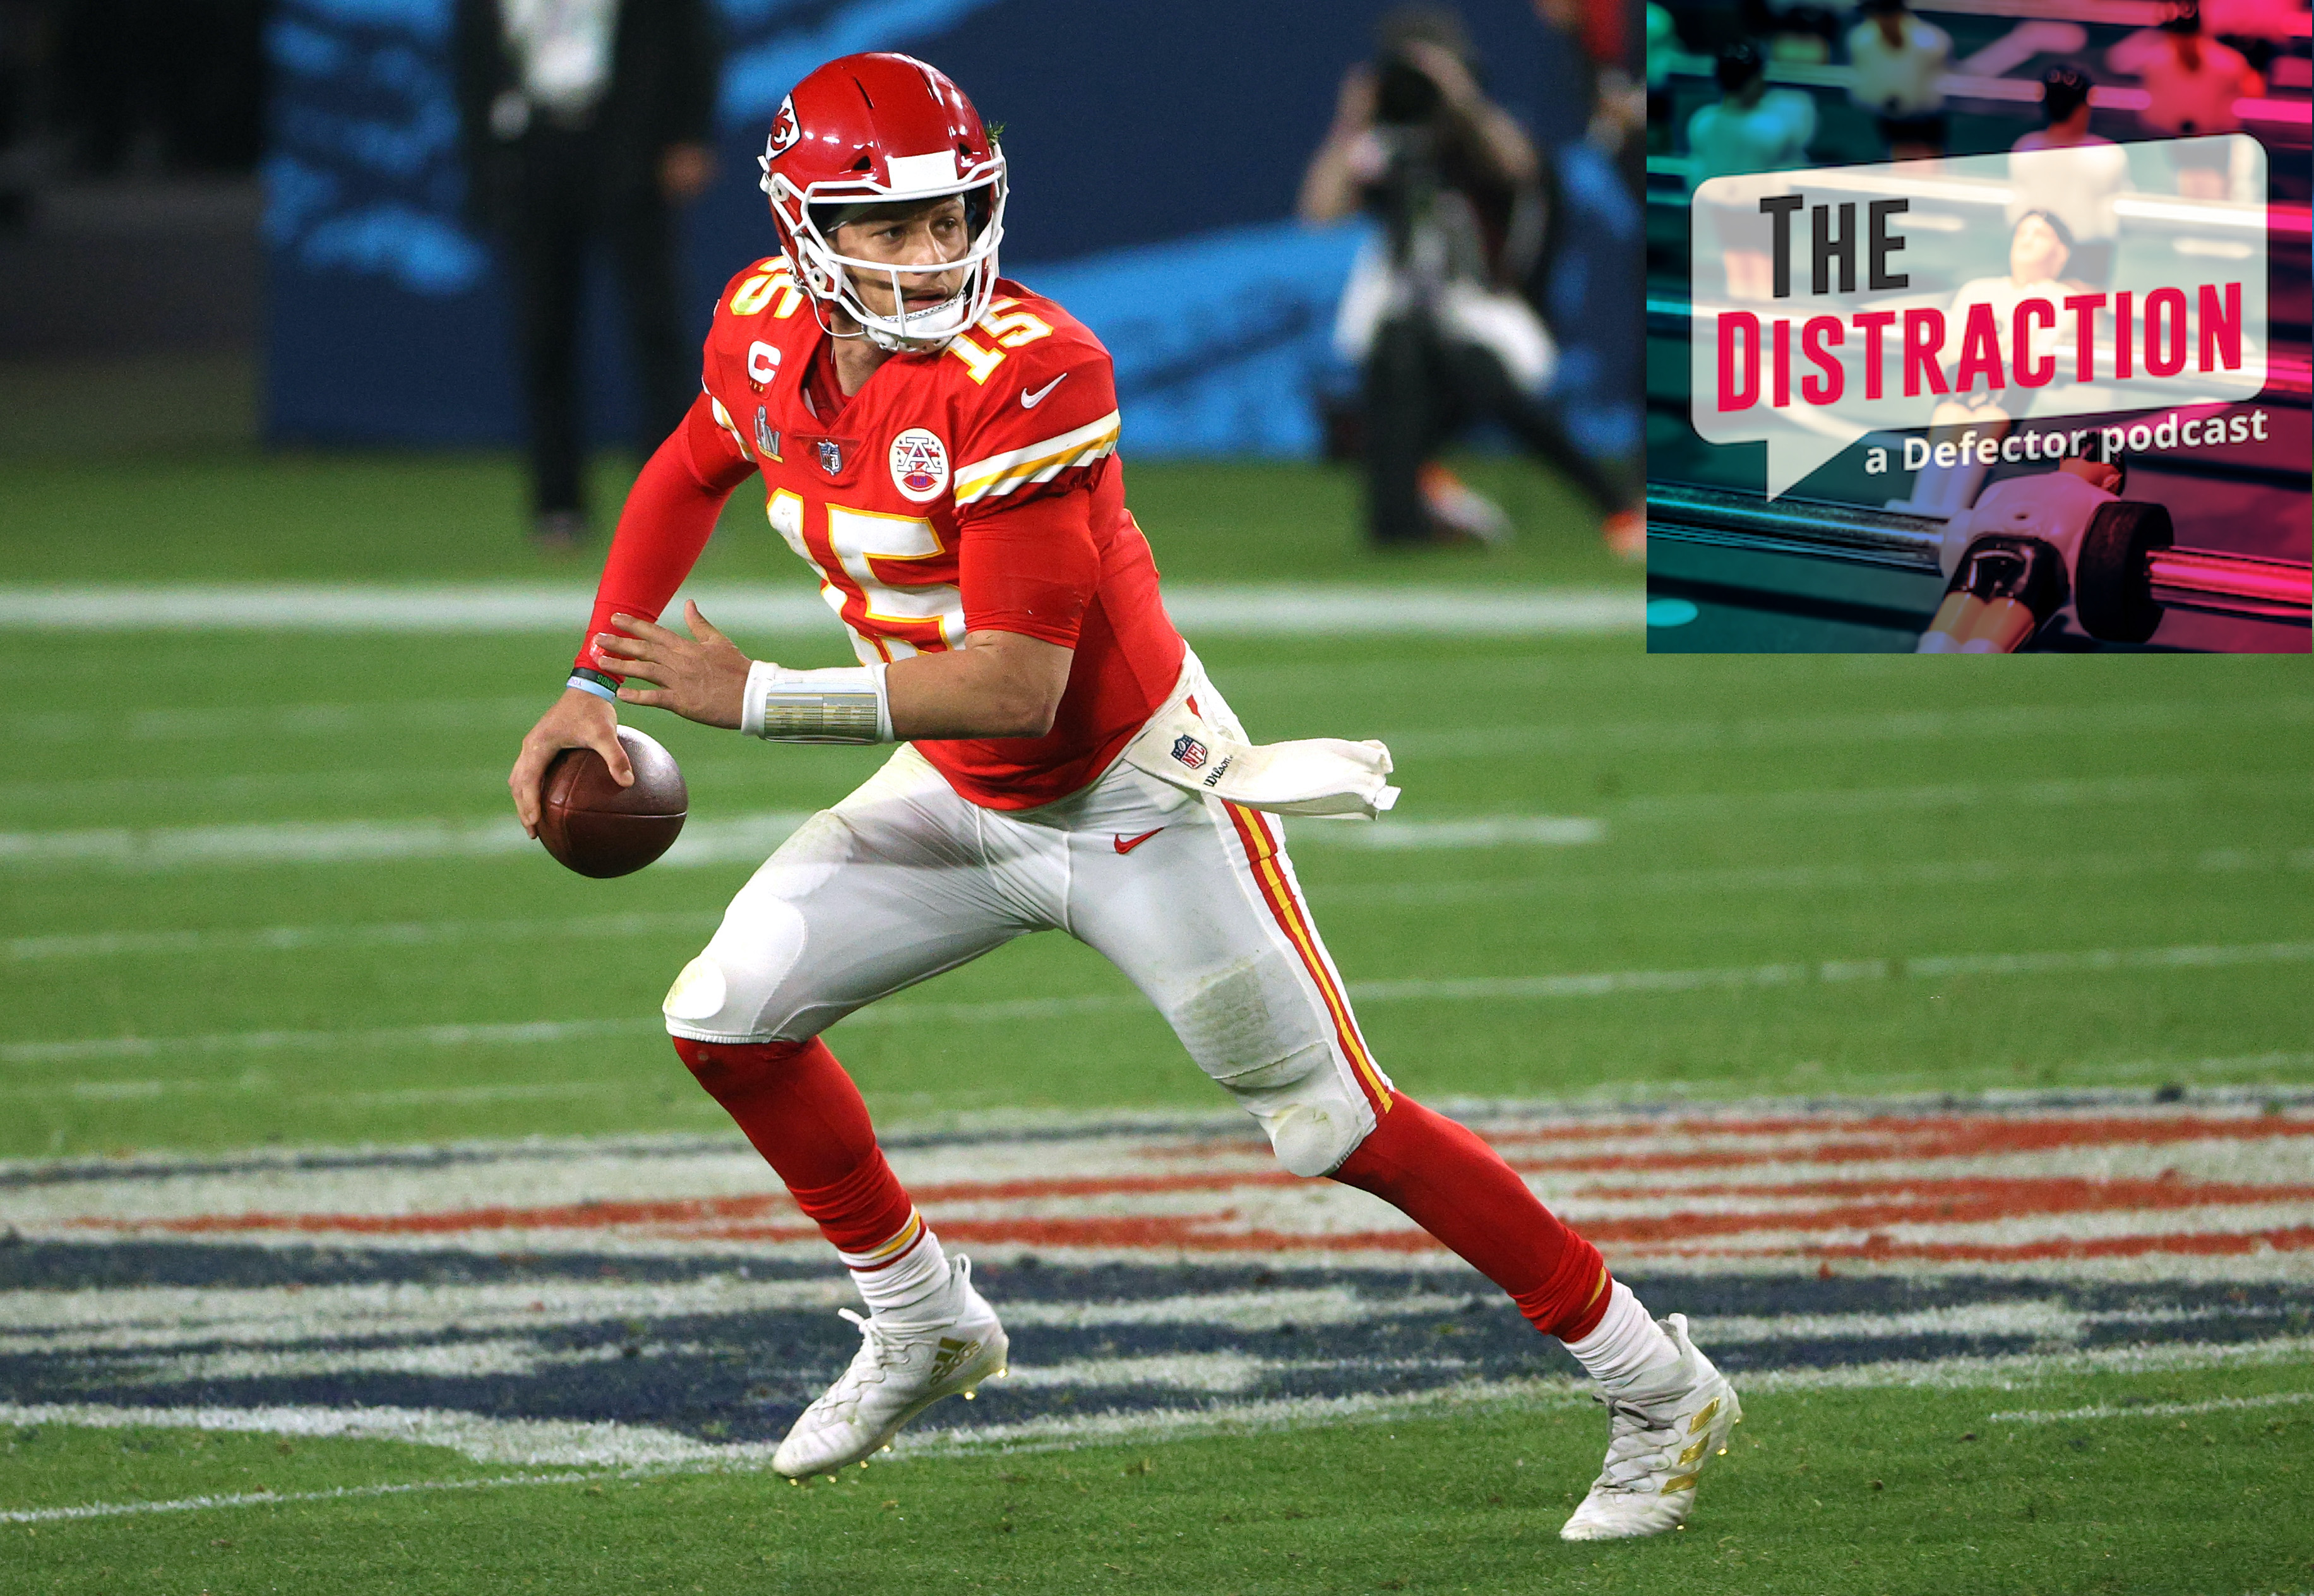 Patrick Mahomes, seen here running away from The Distraction podcast logo.